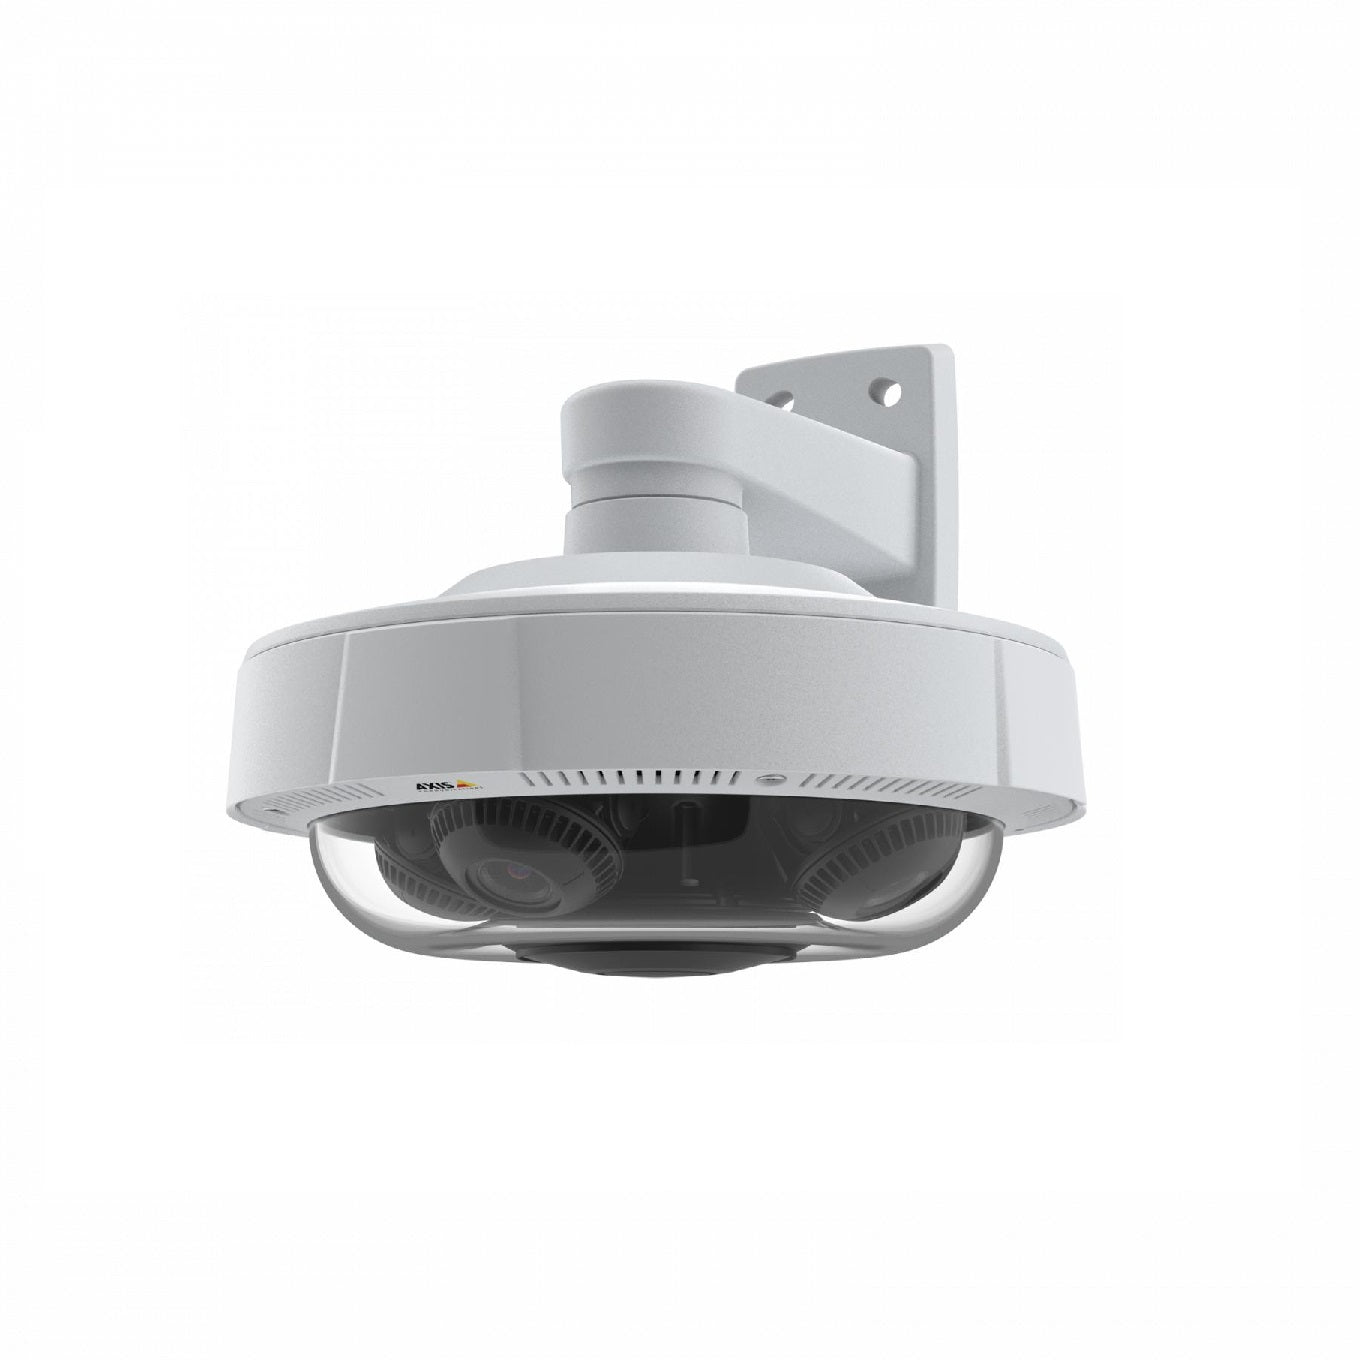 AXIS P3738-PLE Panoramic Camera offers 4x4K (4x8 MP) sensors and is perfect for 360° and 270° surveillance